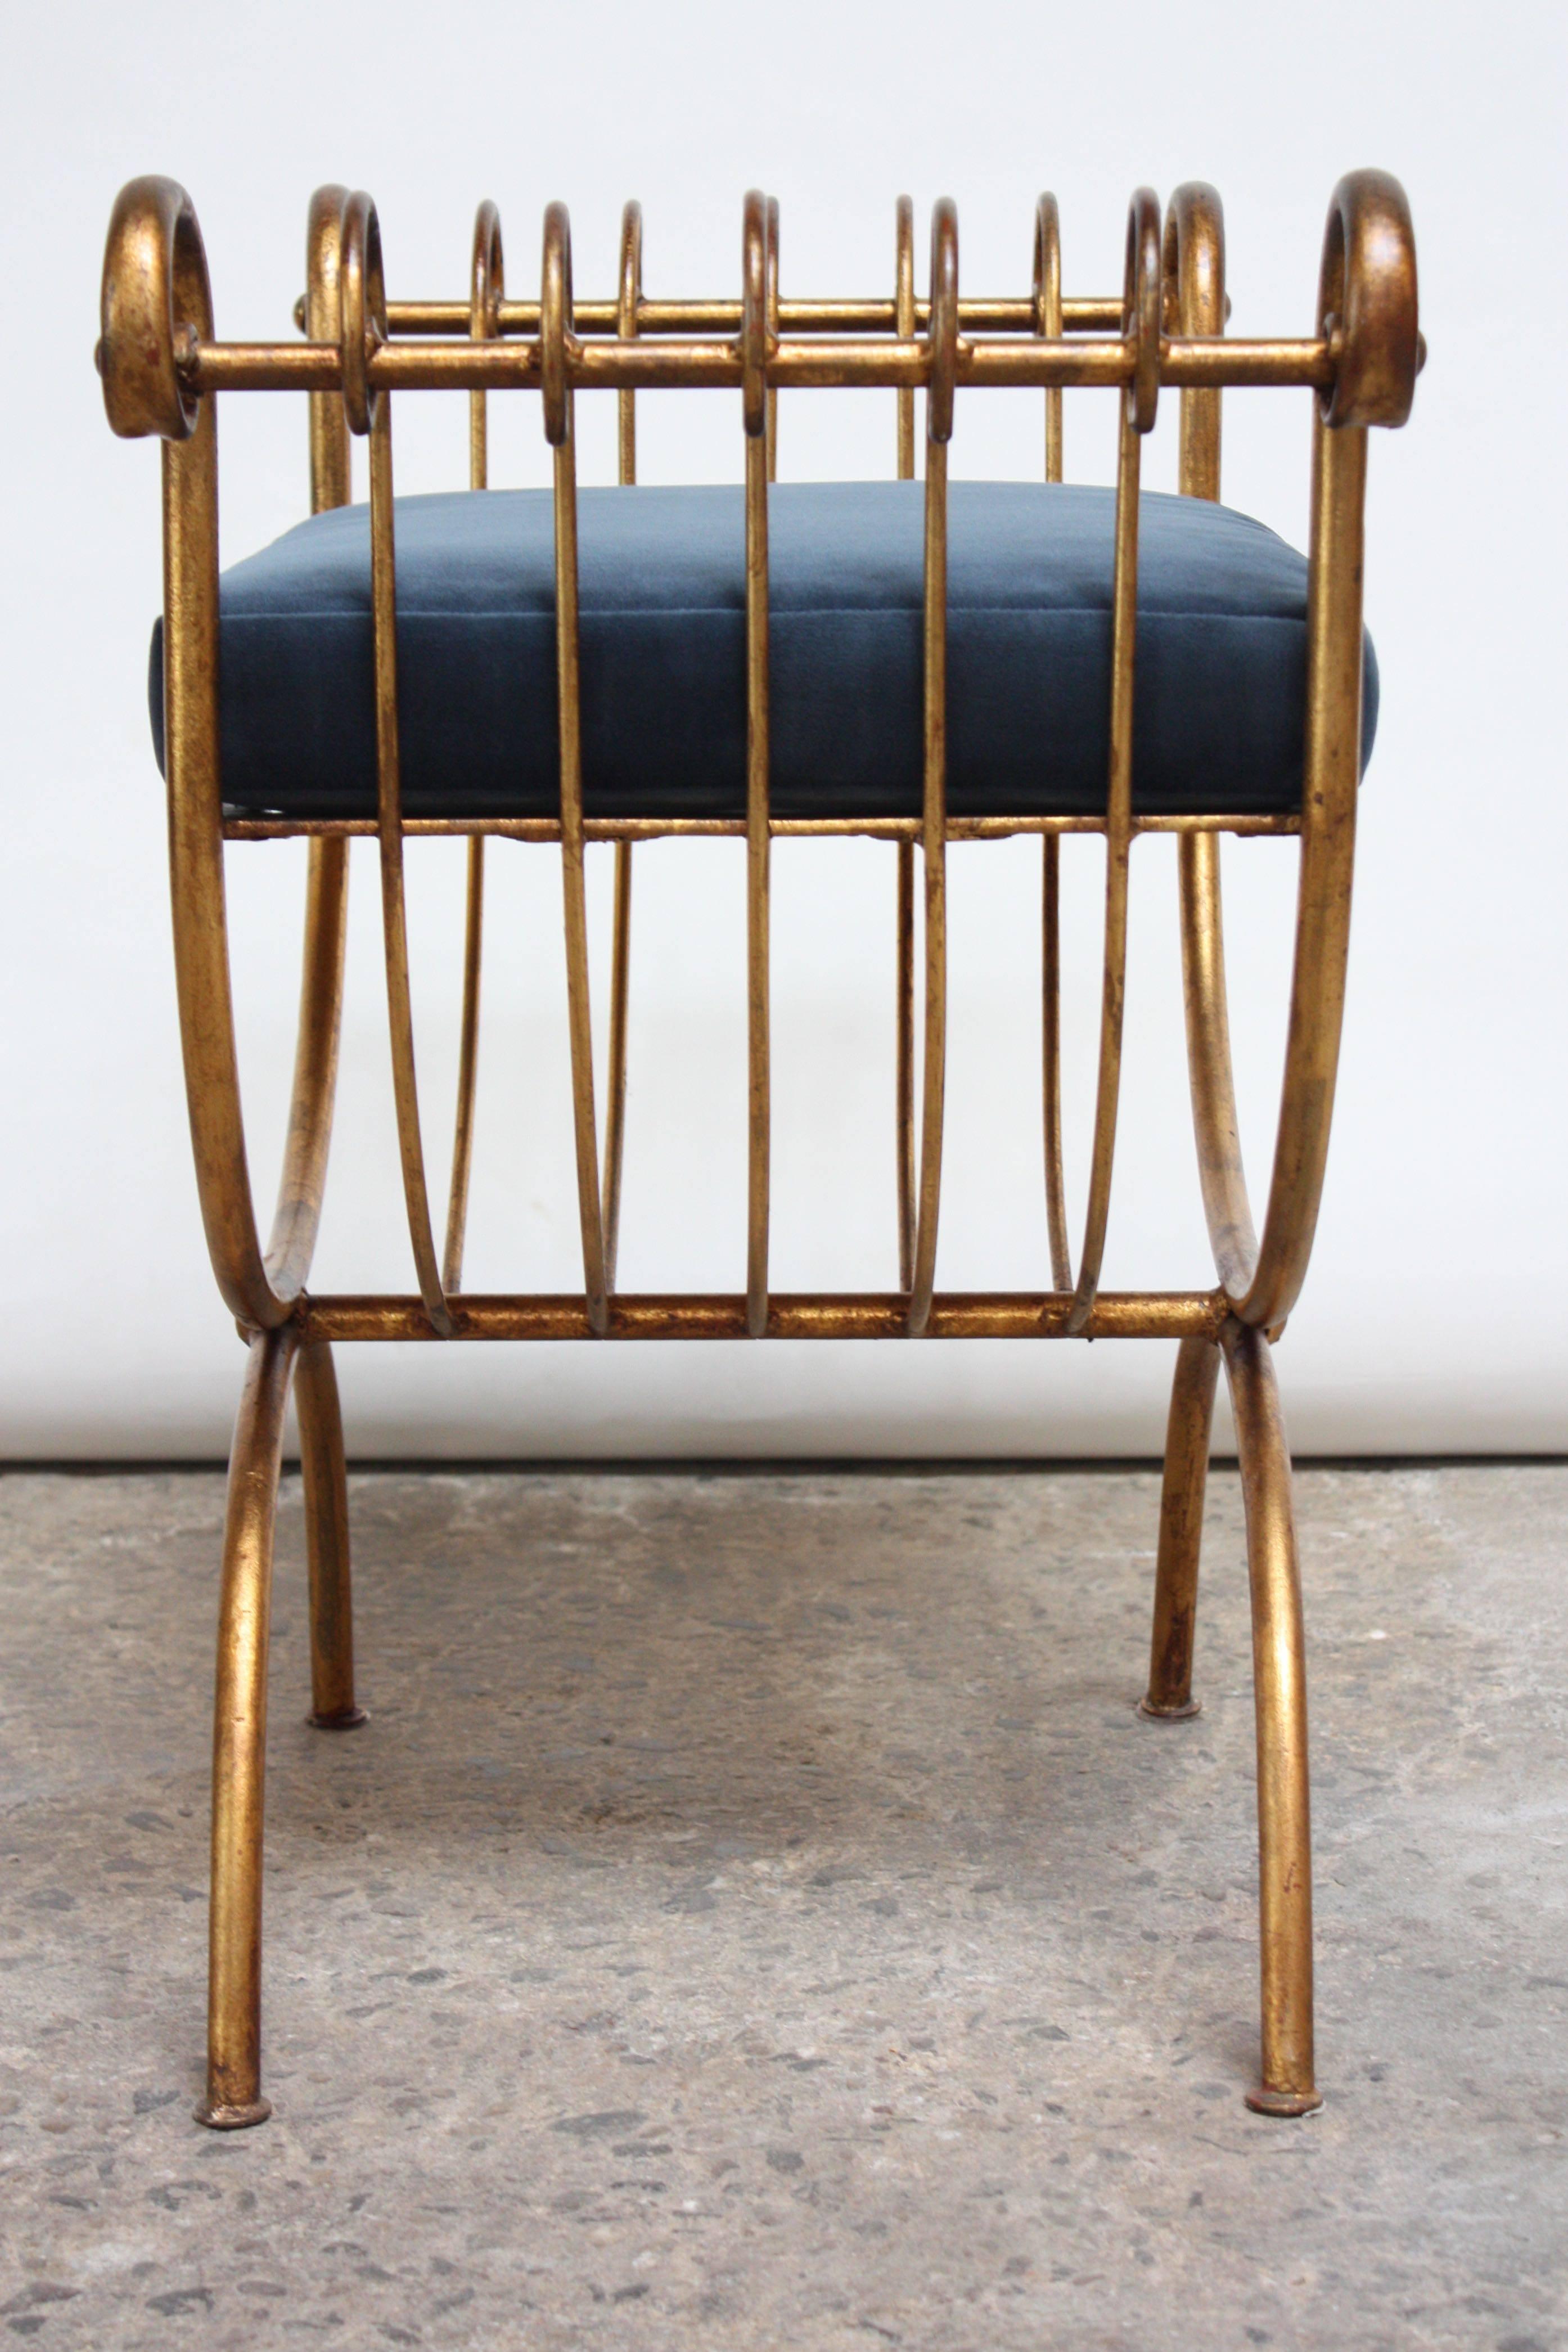 Gilt Italian Gilded Metal Stool or Bench with Blue Velvet Cushion by S. Salvadori